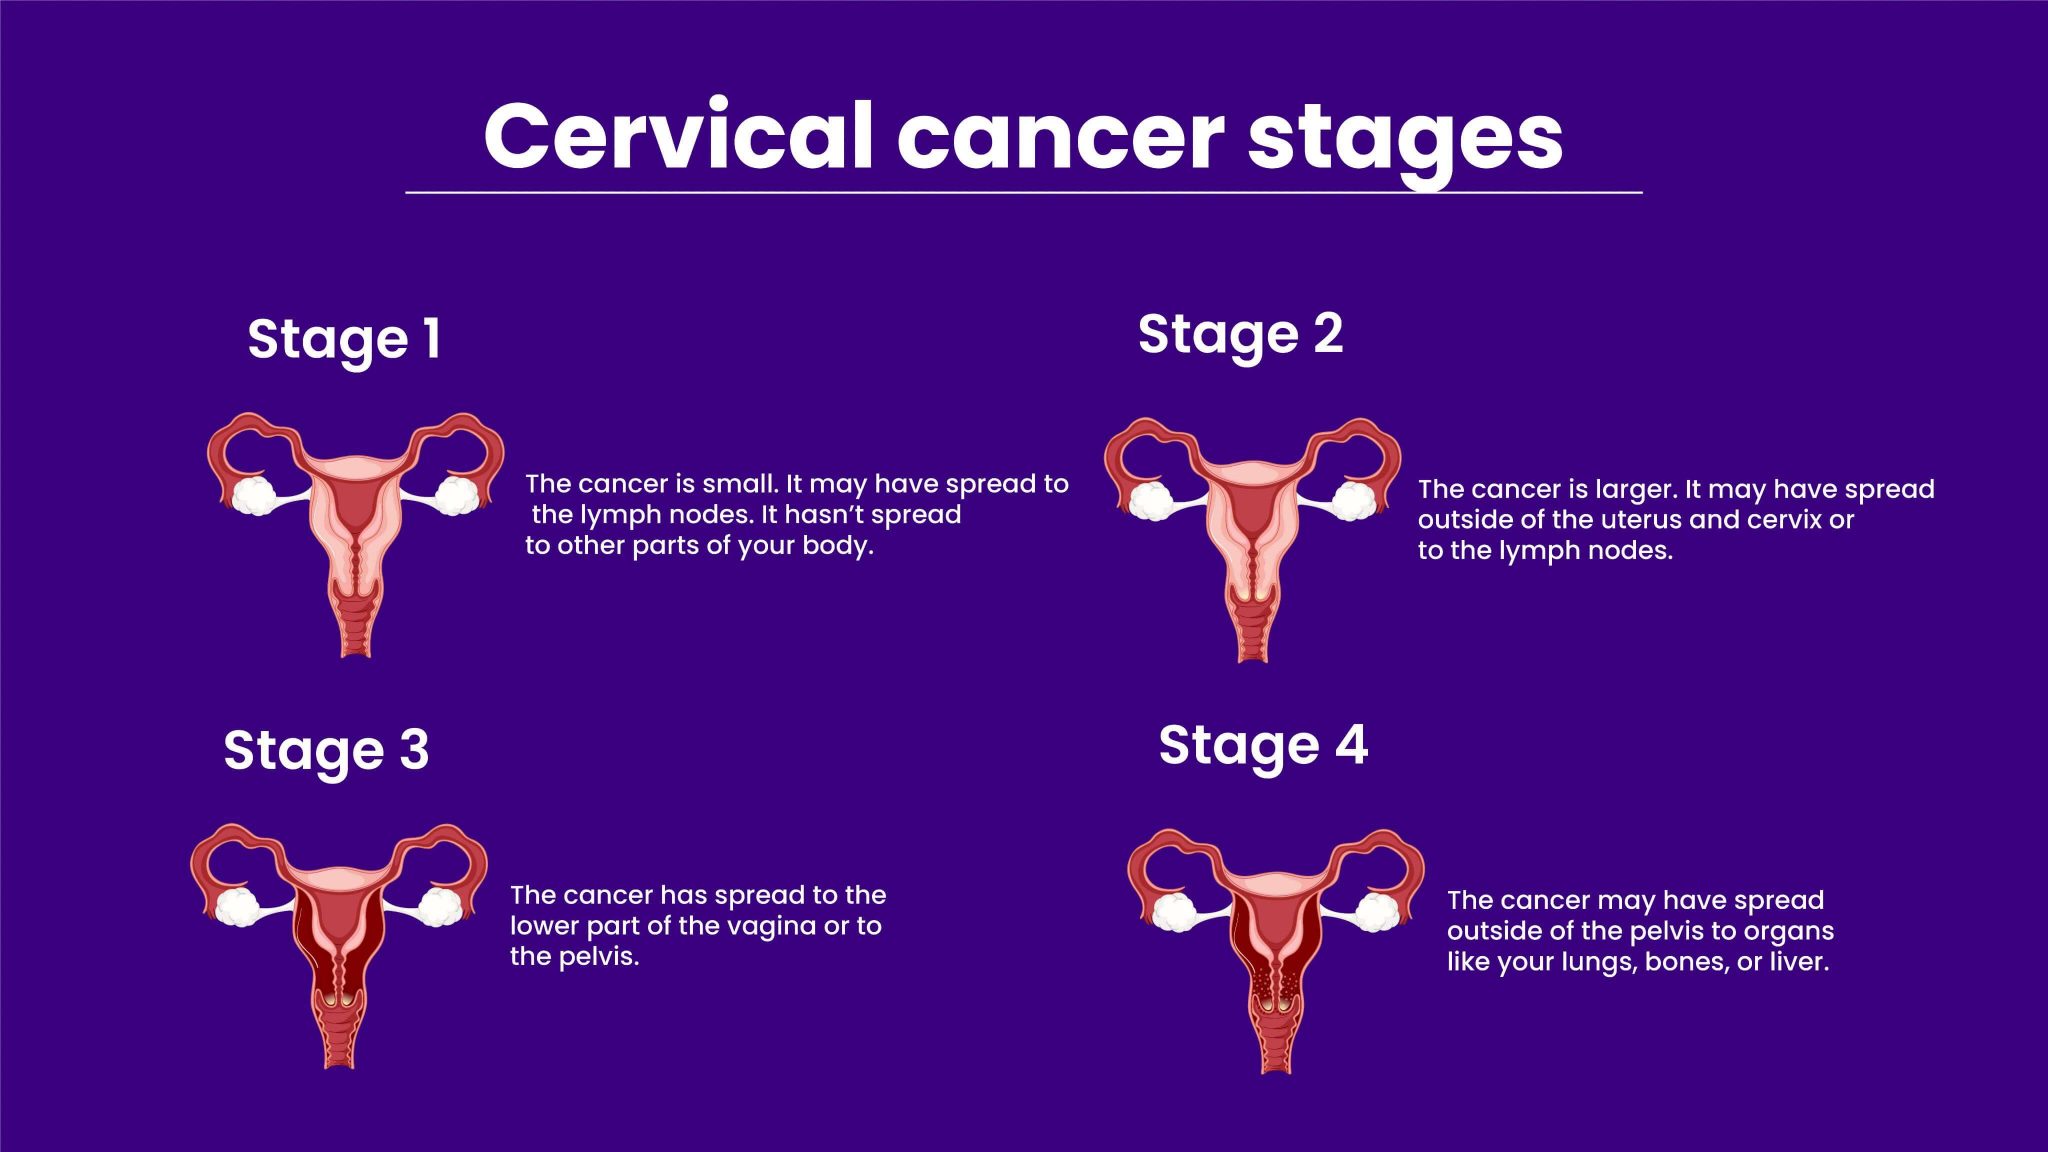 research study on cervical cancer